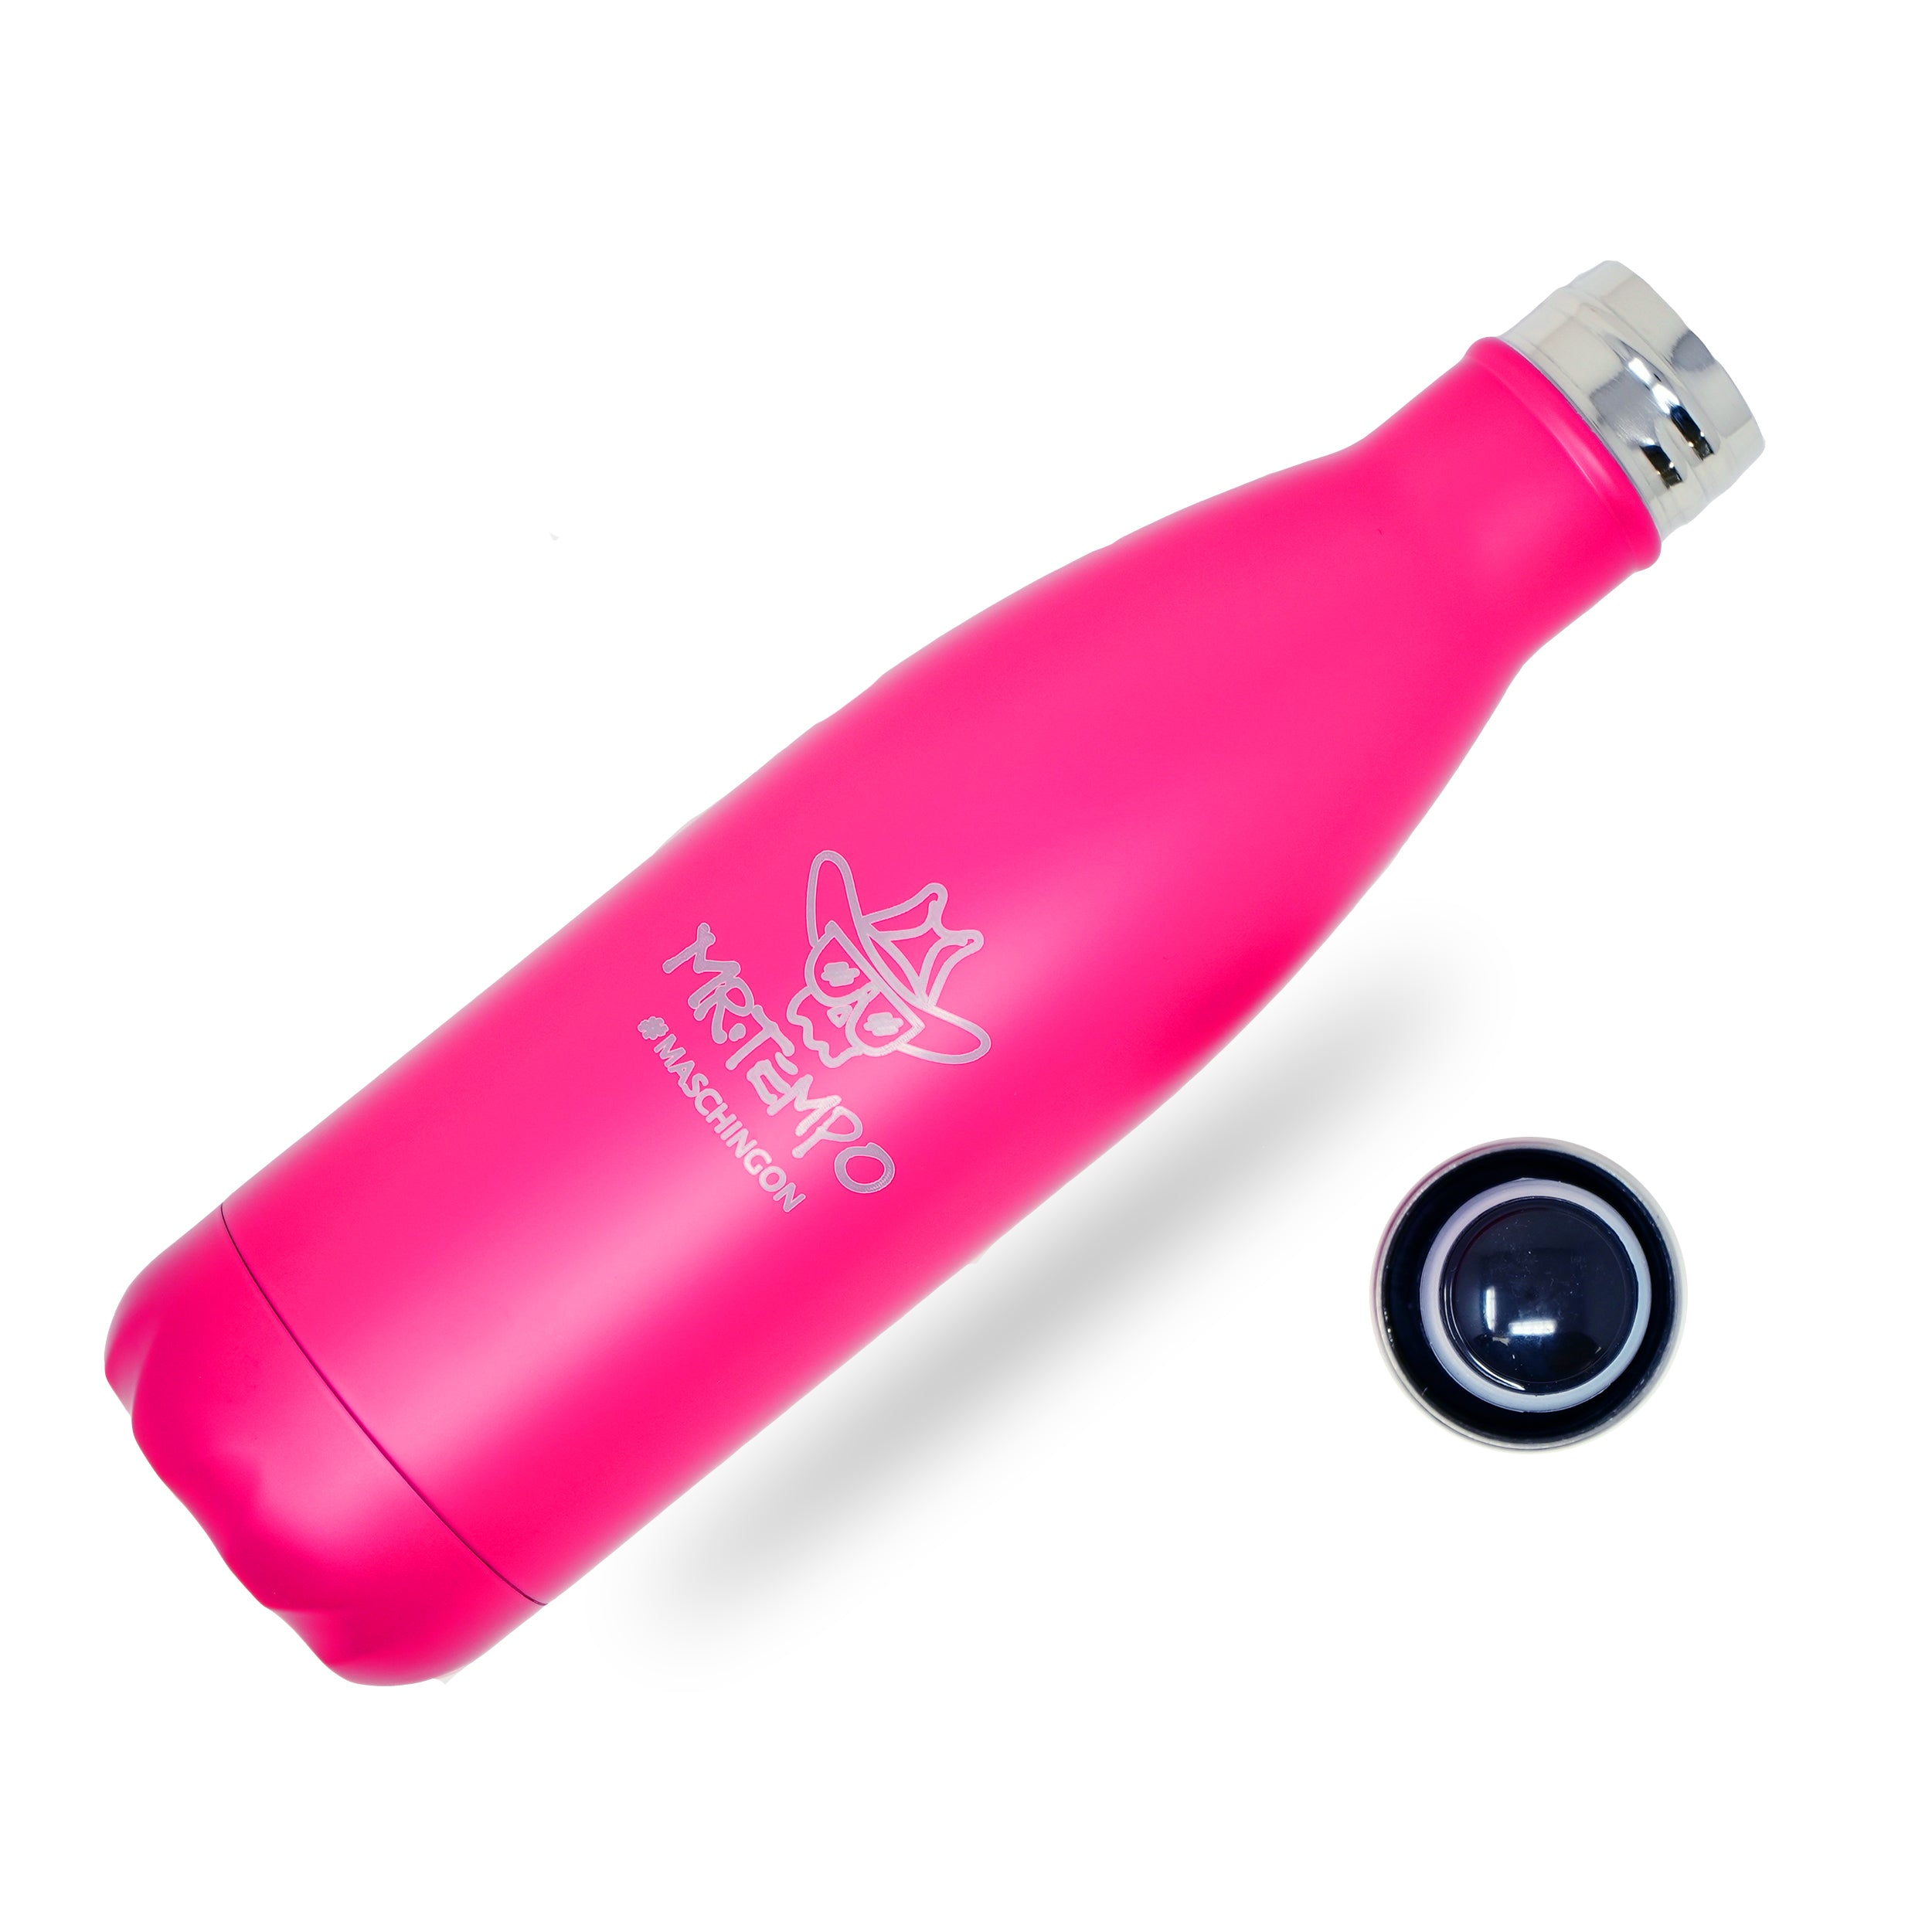 Mr.Tempo Water Bottle (Hot Pink)